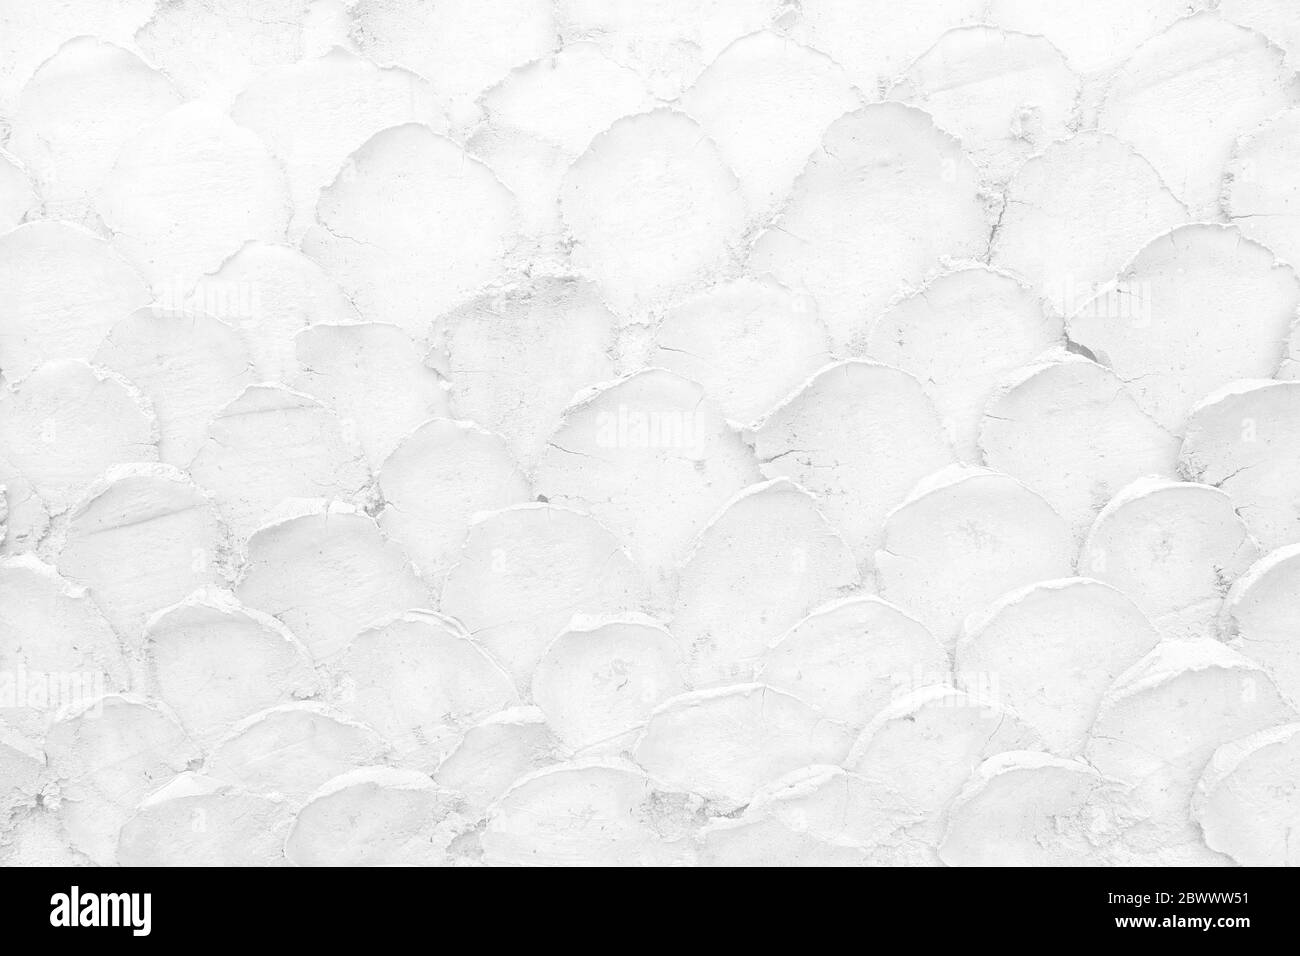 White Fish scale Stucco Wall Texture Background Stock Photo - Alamy